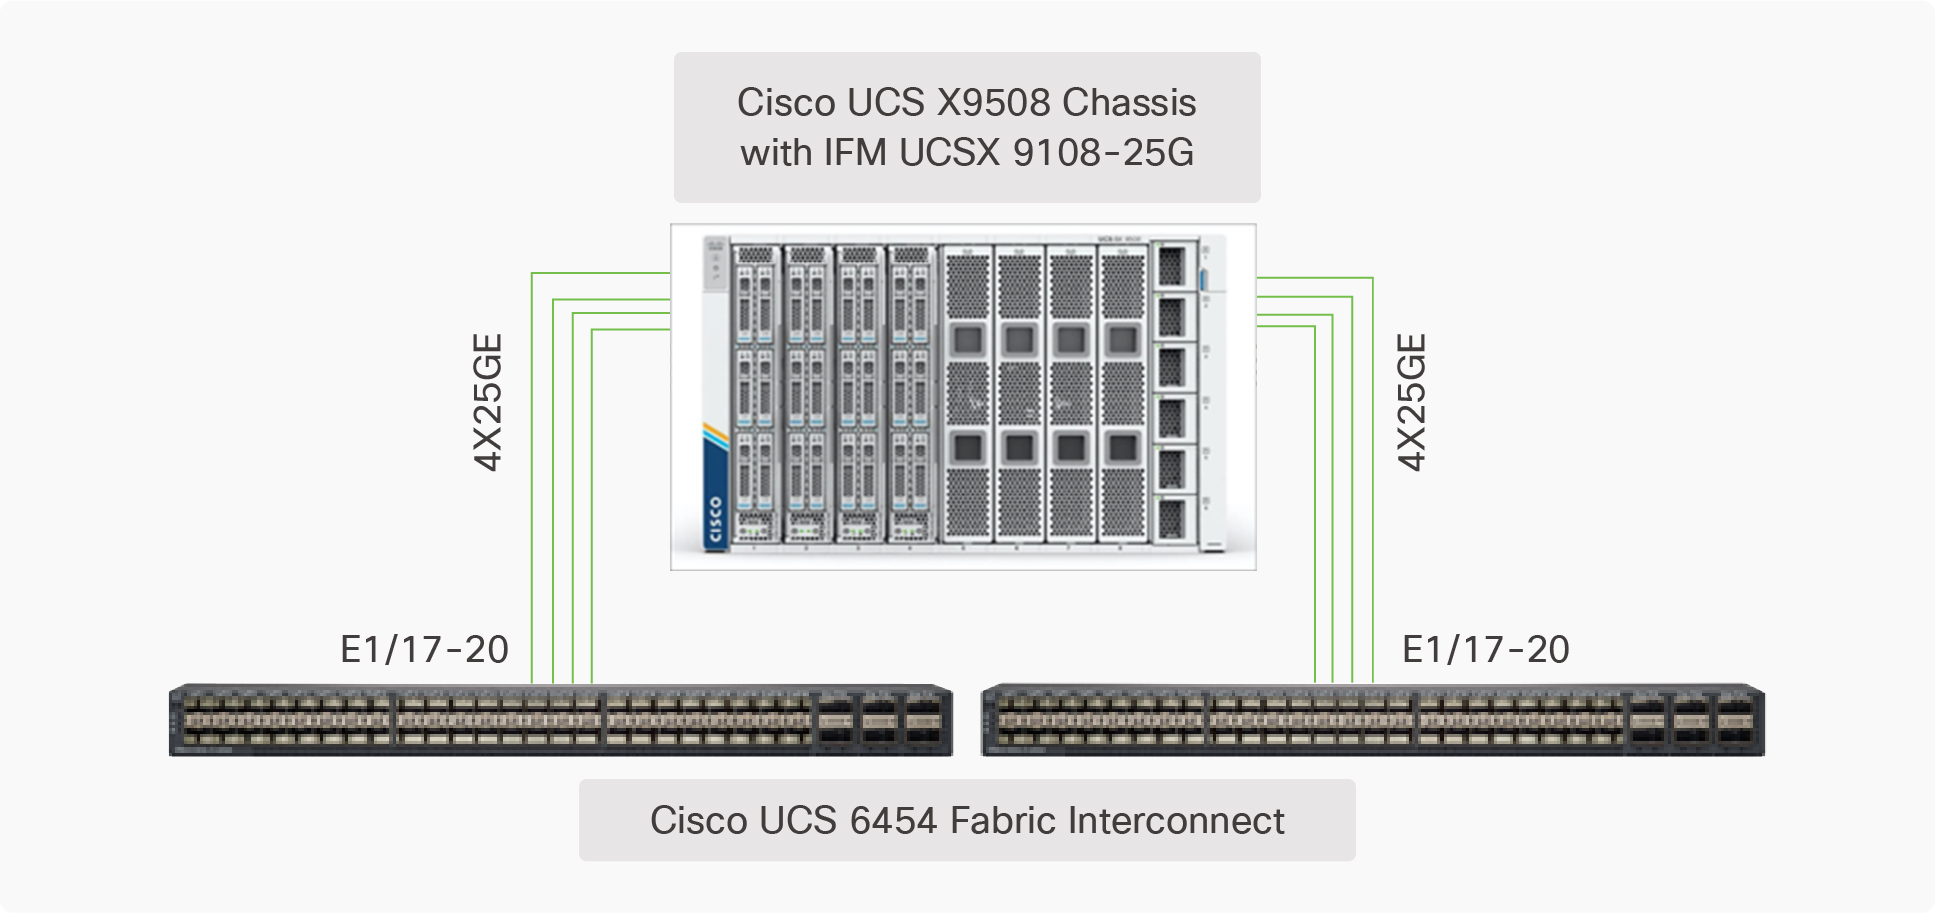 Cisco UCS X9508 Chassis connectivity to Cisco UCS Fabric Interconnects